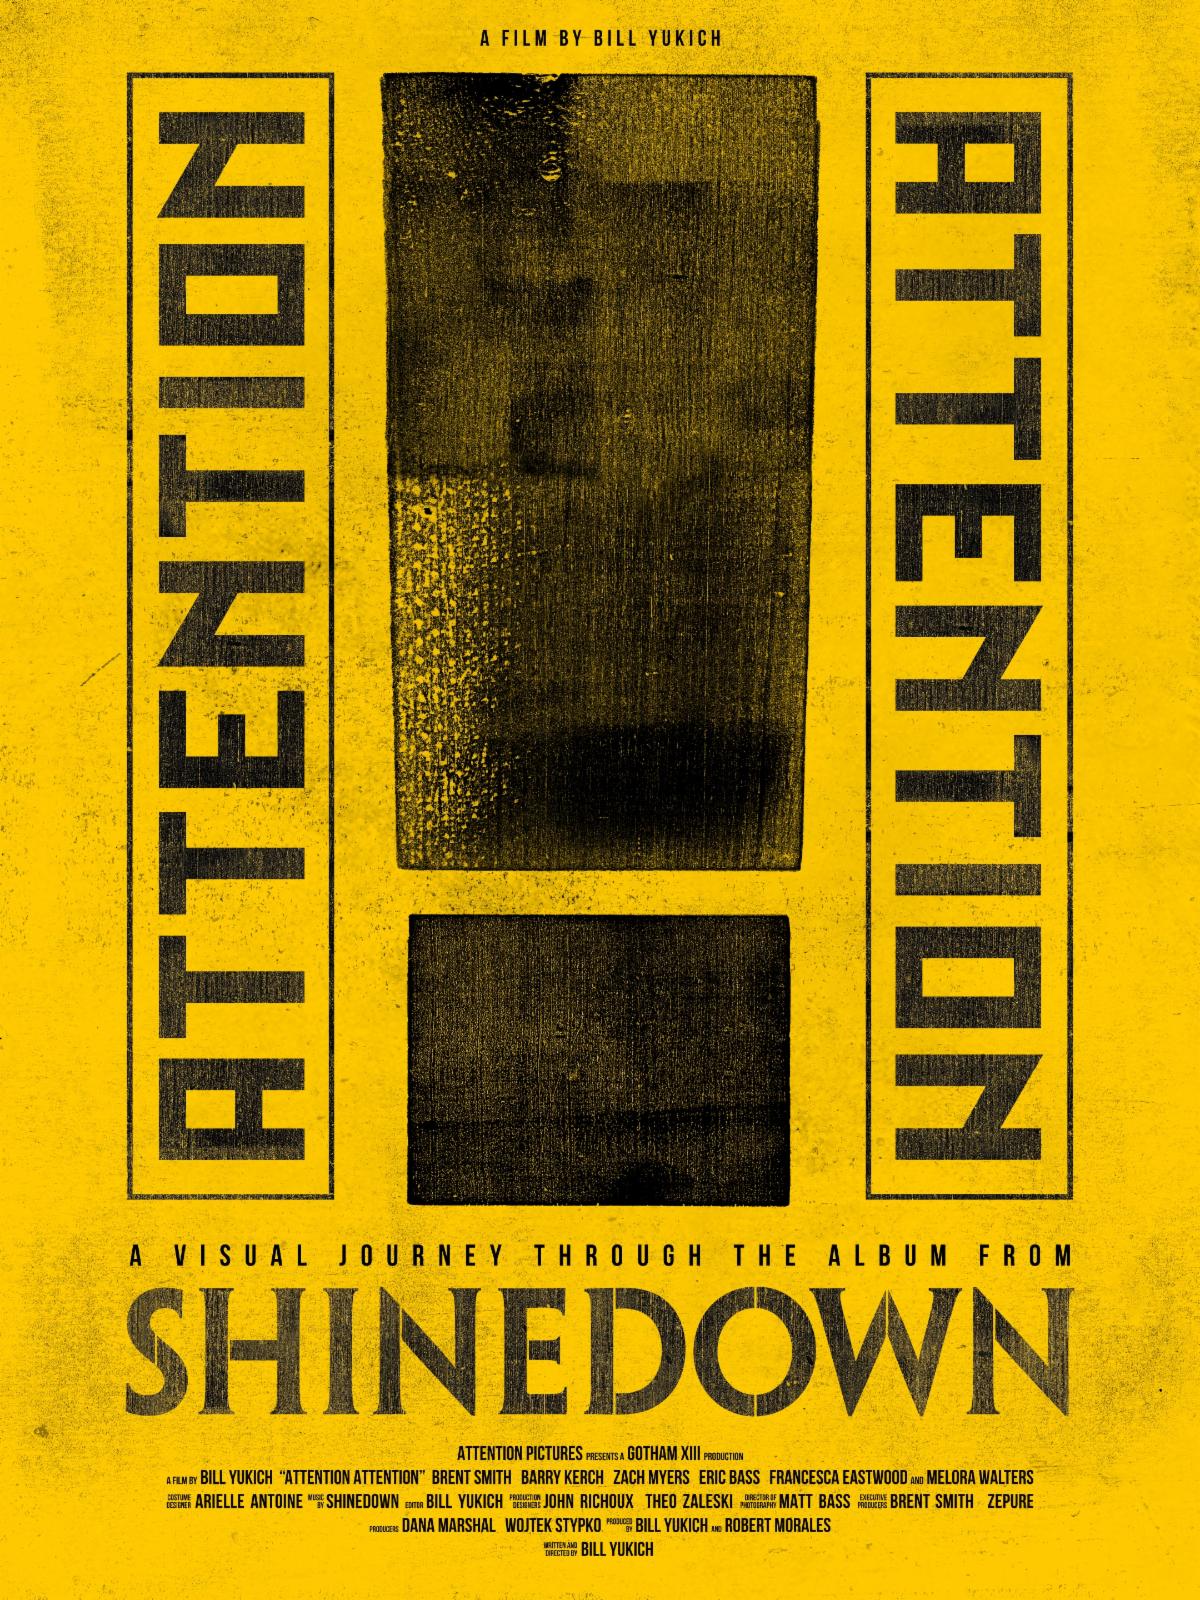 Shinedown Announces ATTENTION ATTENTION Feature Film Experience